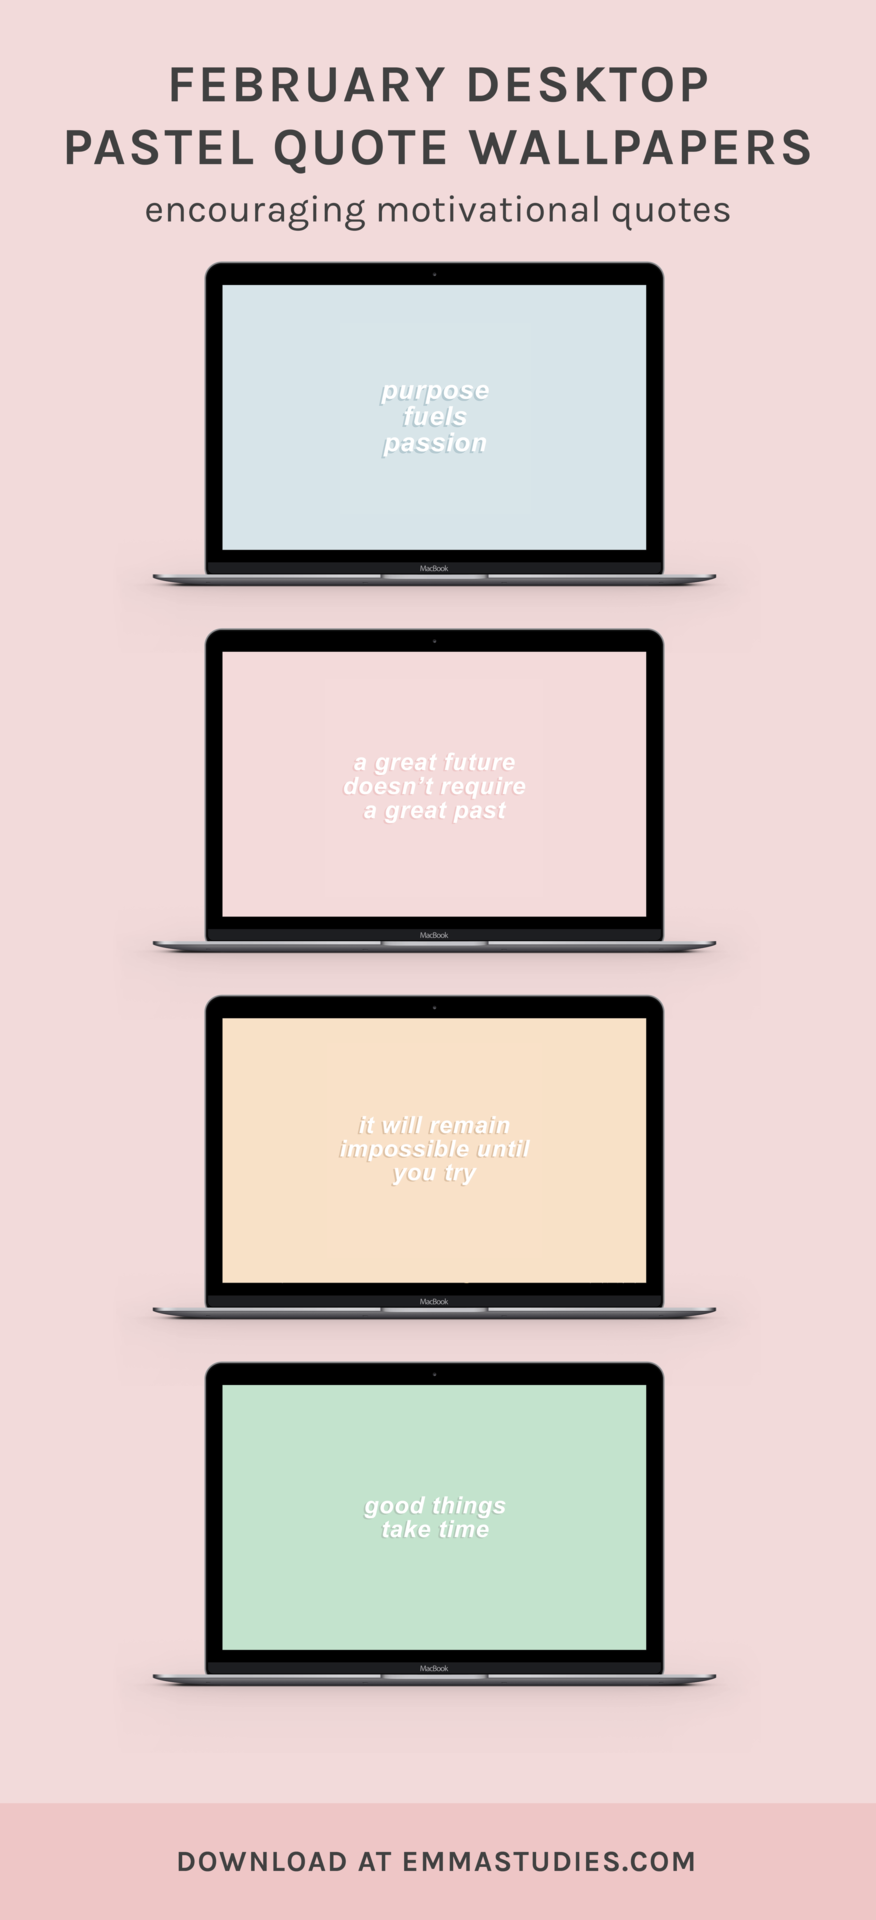 Emma S Studyblr February Pastel Quotes Desktop Wallpaper Here Are